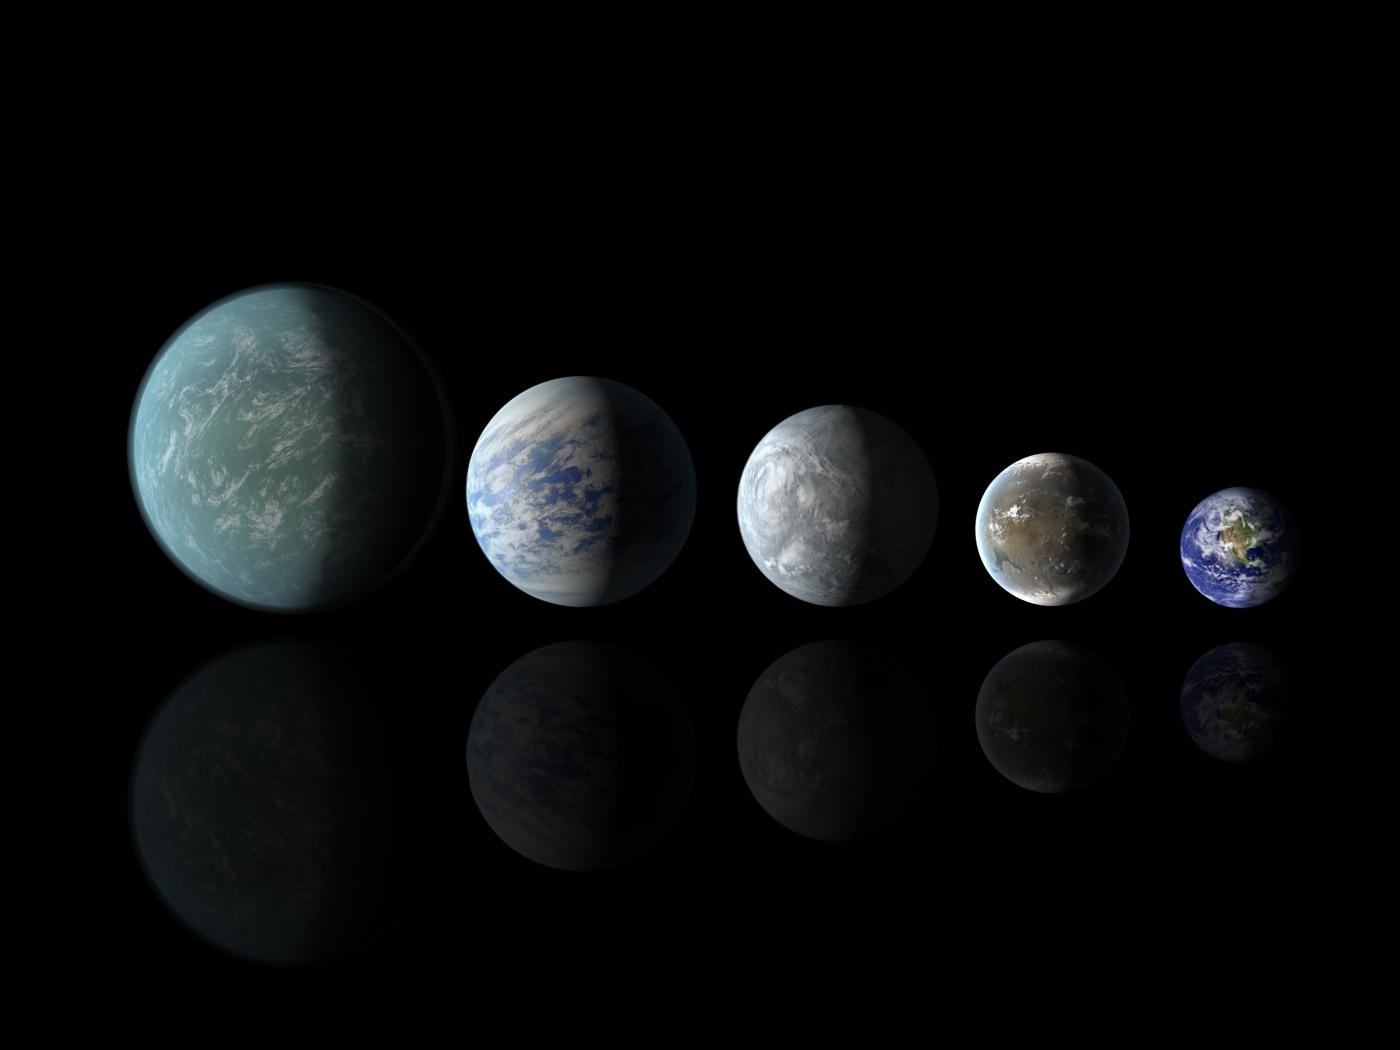 Compare the size habitable planets